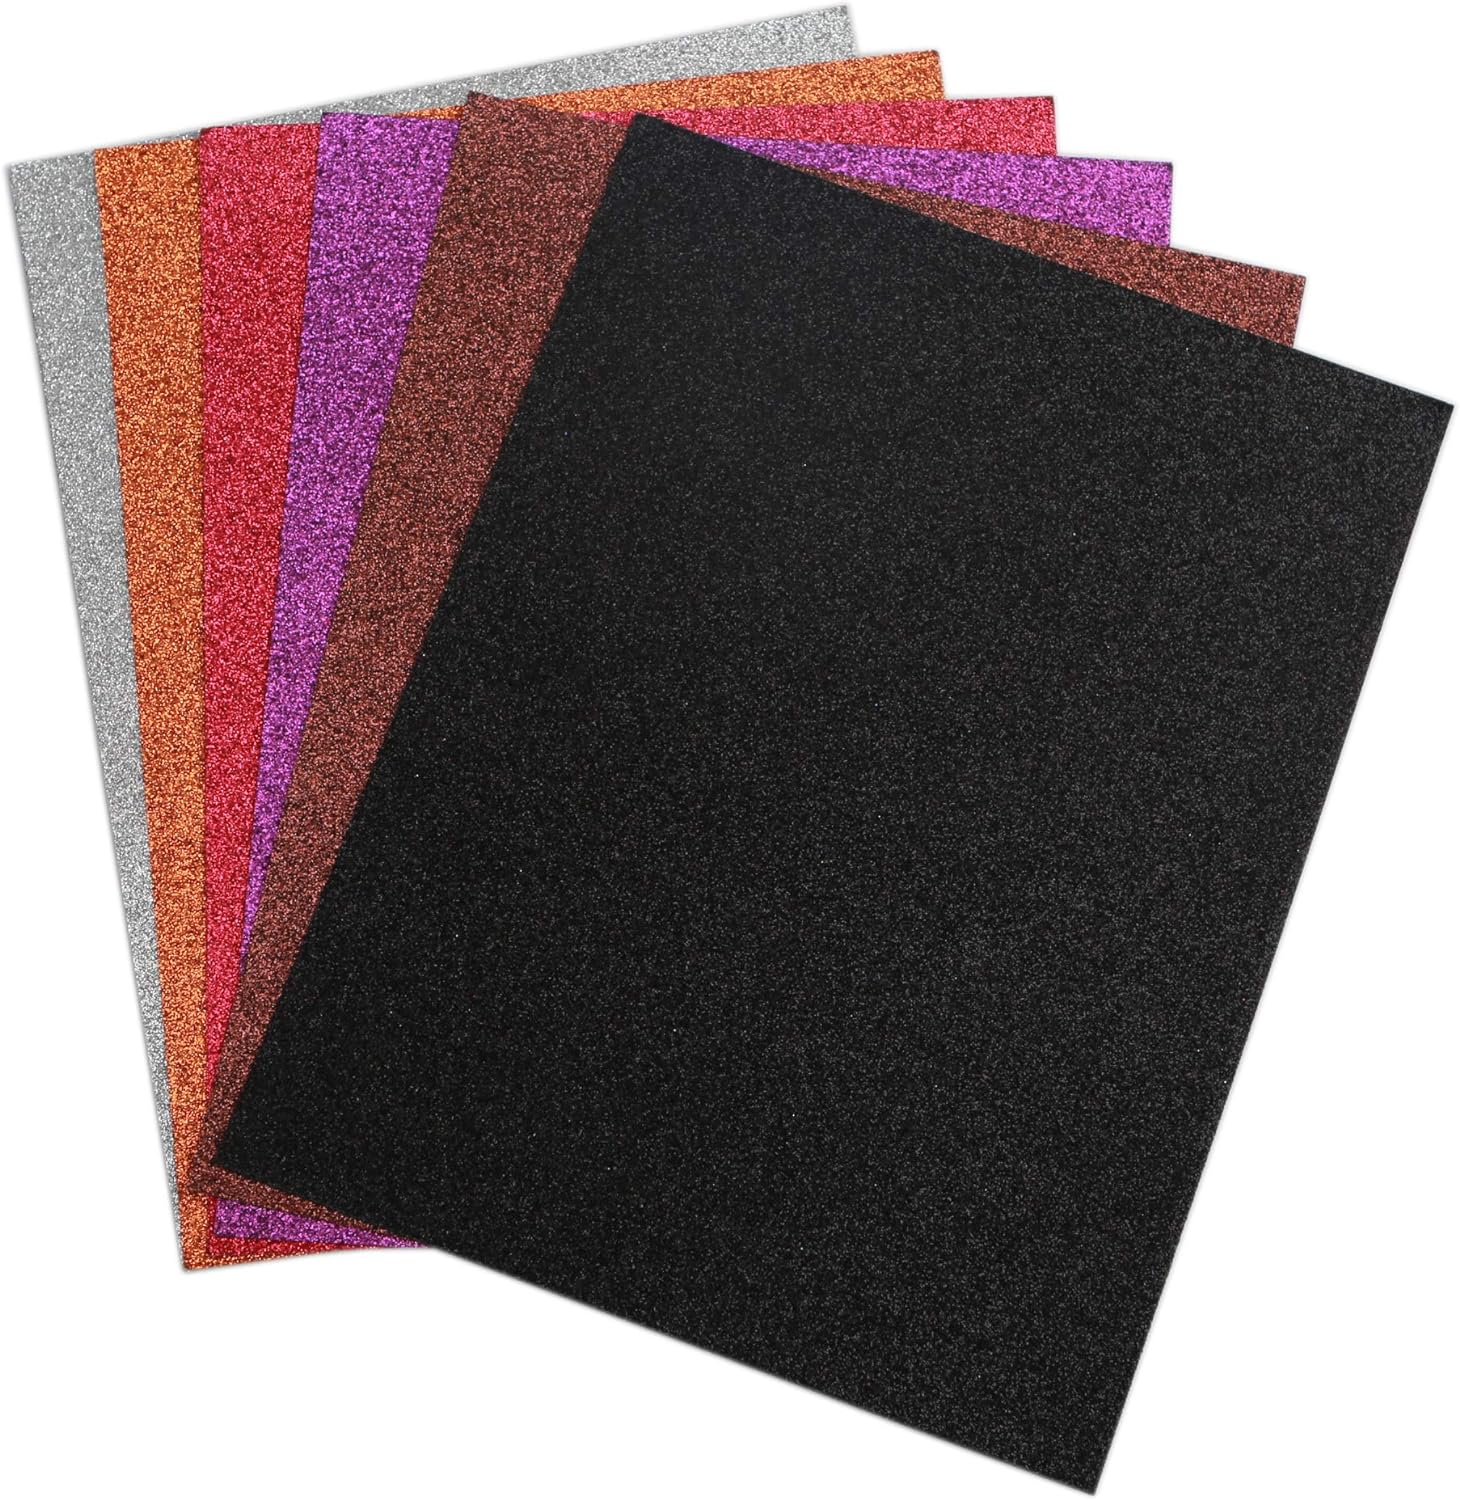 16 Pack Glitter Eva Foam Handicraft Sheets Non-adhesive 8.5x11 Inches Thick And Soft Paper For DIY Projects 12 Assorted Colors By PAIDU